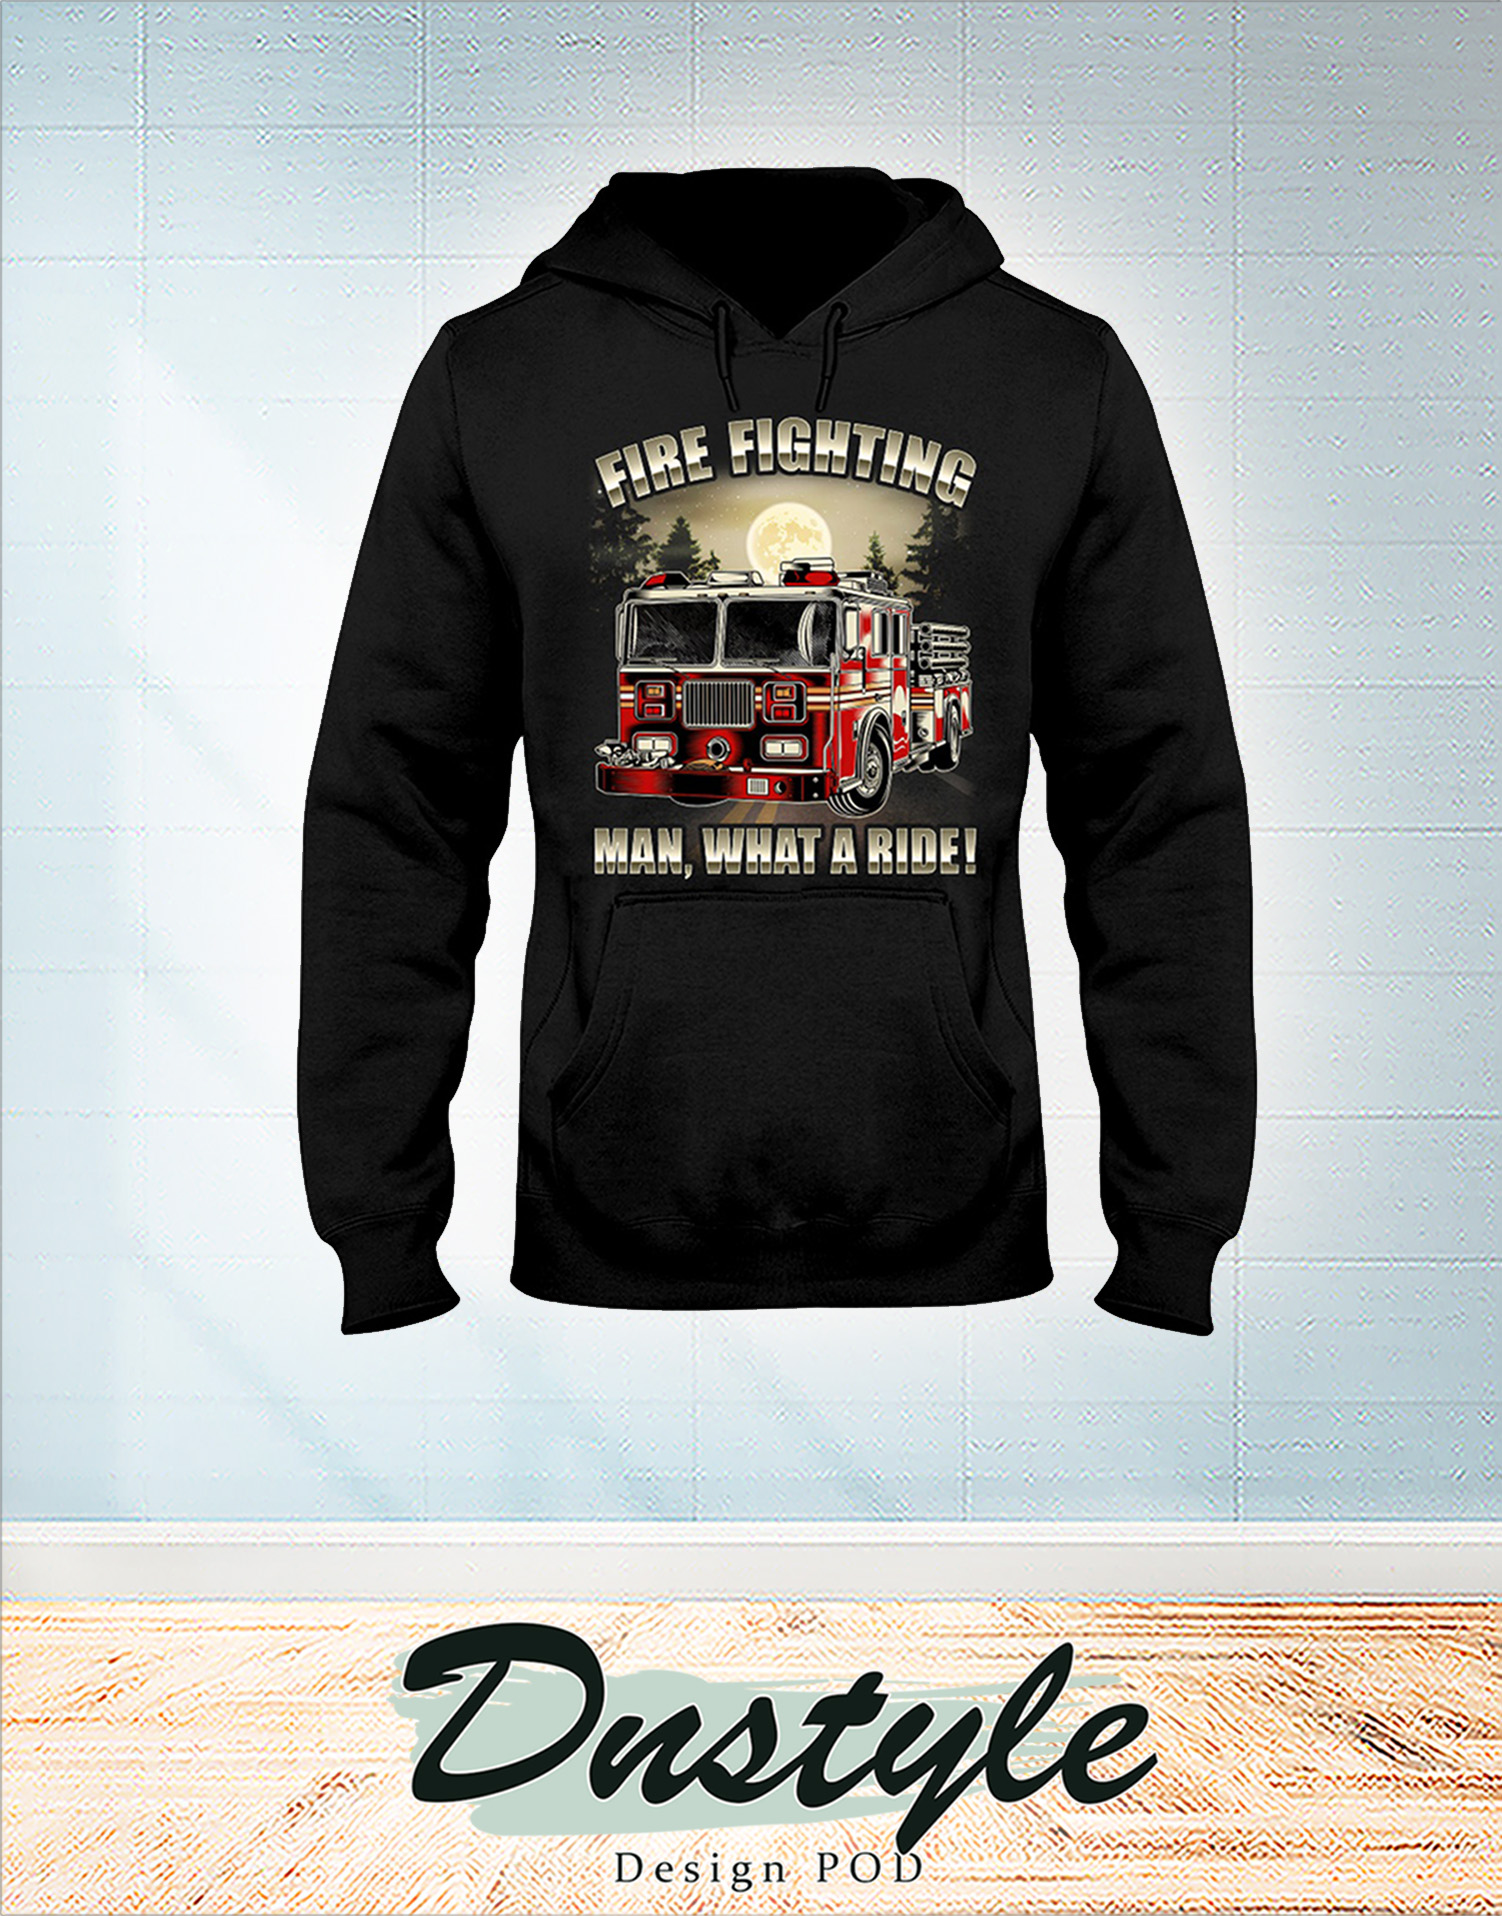 Fire fighting man what a ride hoodie